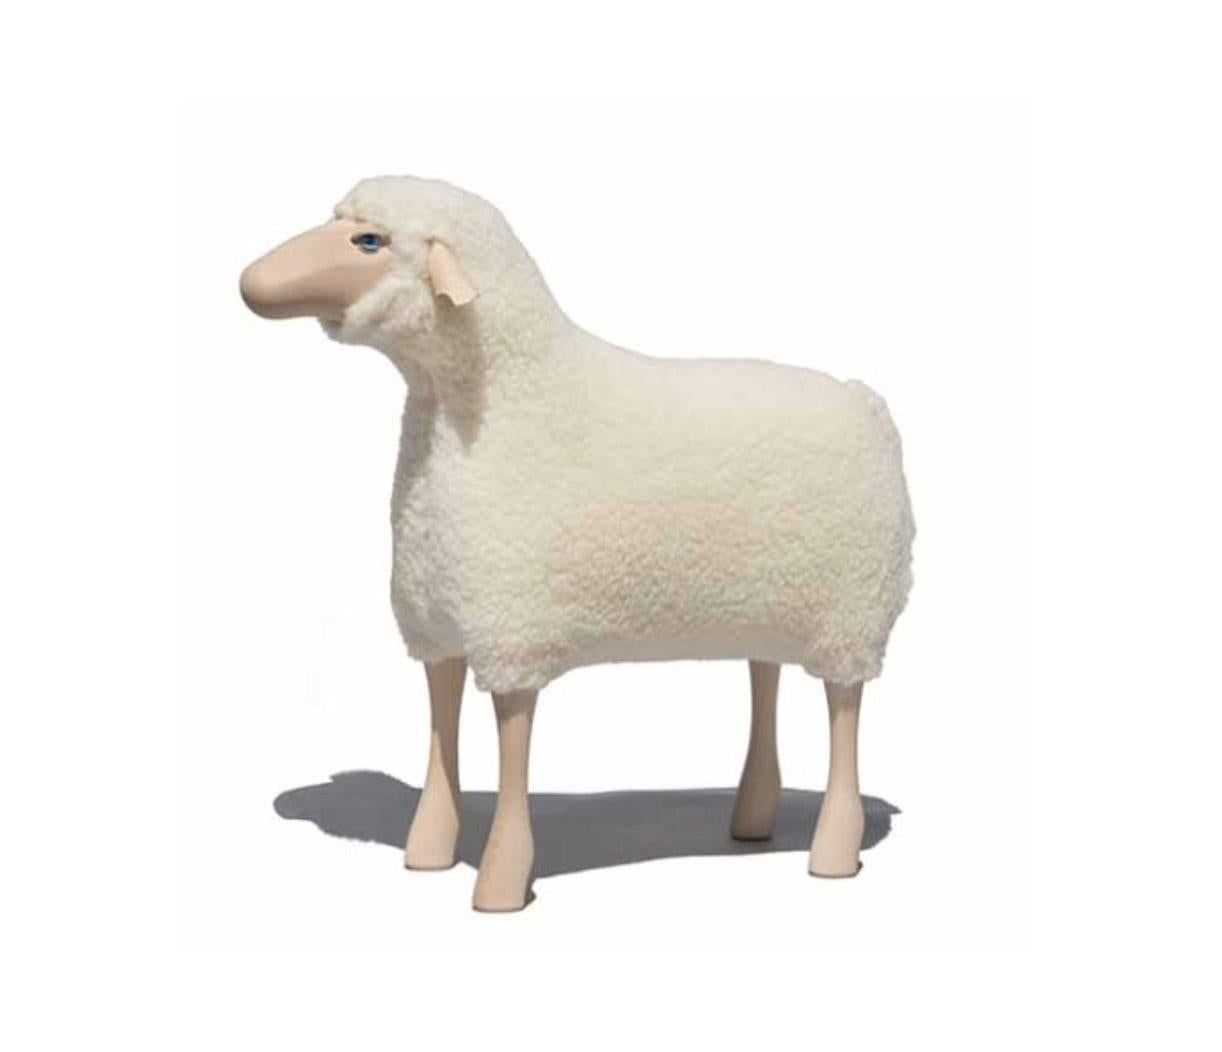 Handmade sheep in curly white fur and black colored wool. Designed by German artist and designer Hans-Peter Krafft, produced in Germany by Meier Germany. 

Originally used as a stool, the sheep is also a beautiful sculptural object. 

Materials